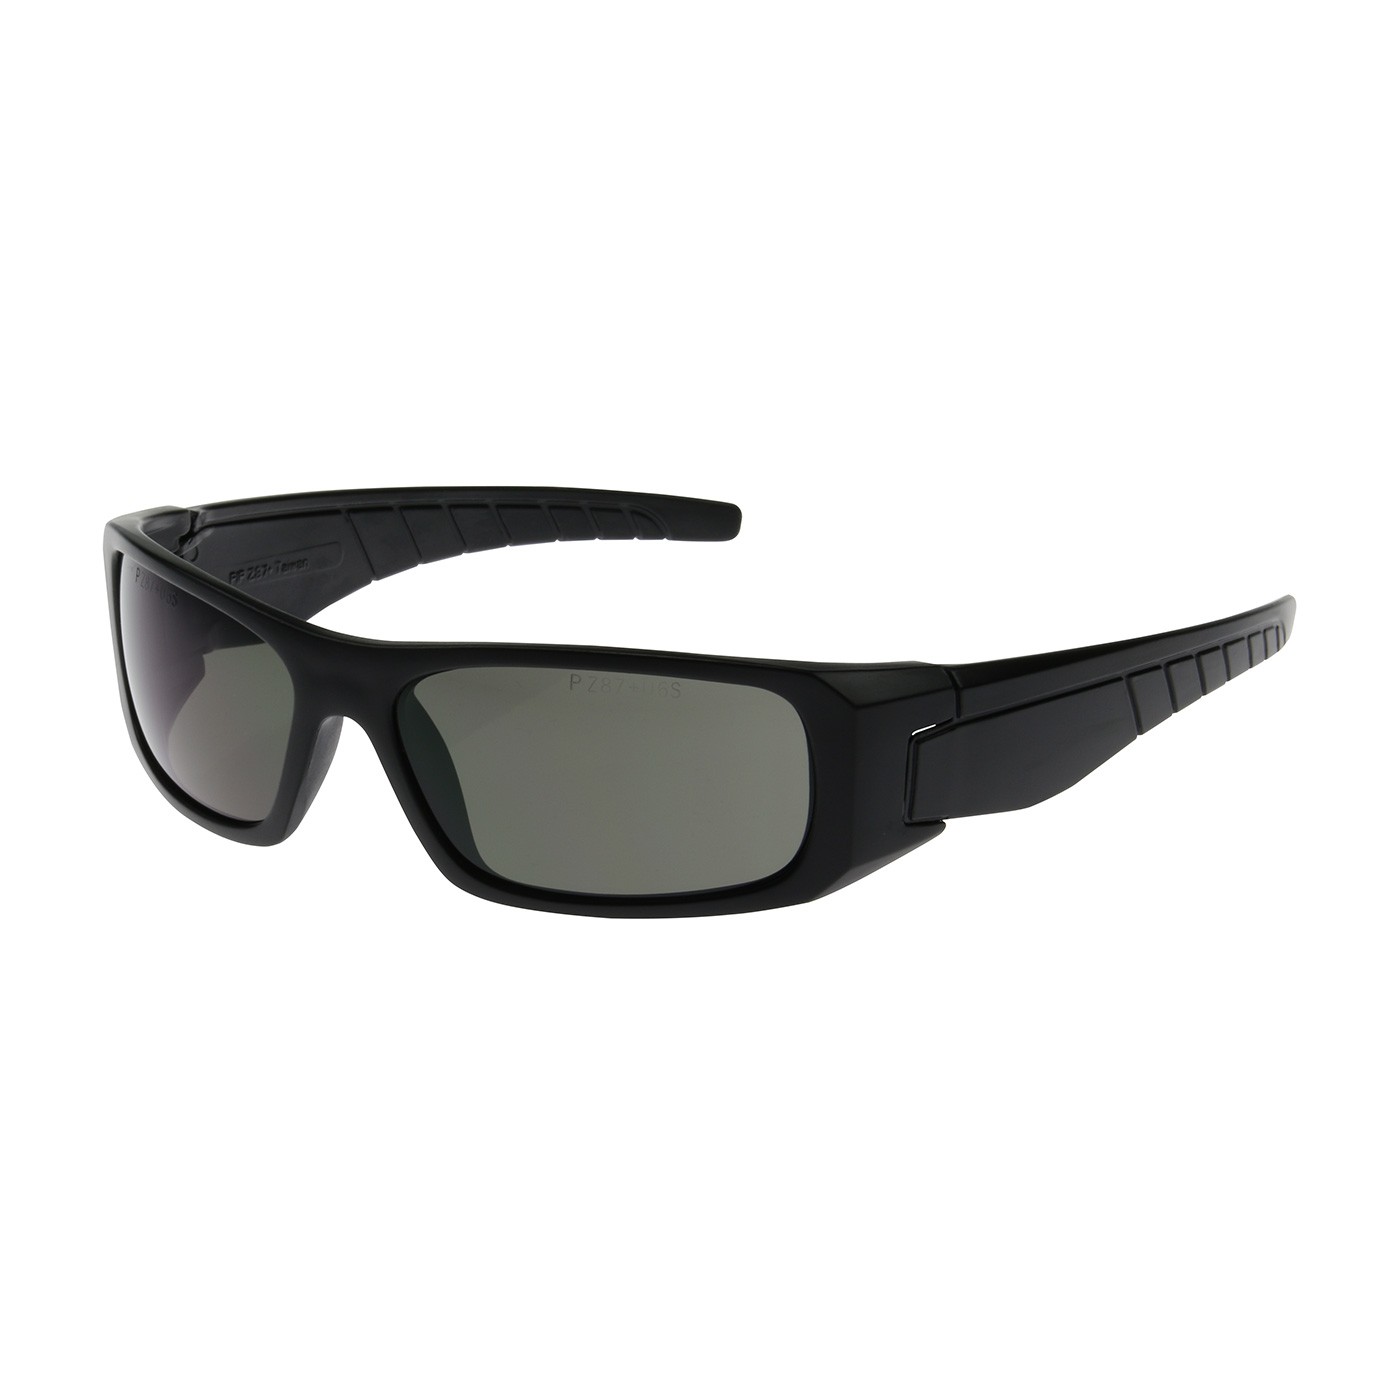 Squadron™ Full Frame Safety Glasses with Black Frame, Gray Lens and Anti-Scratch / Anti-Fog Coating  (#250-53-0021)